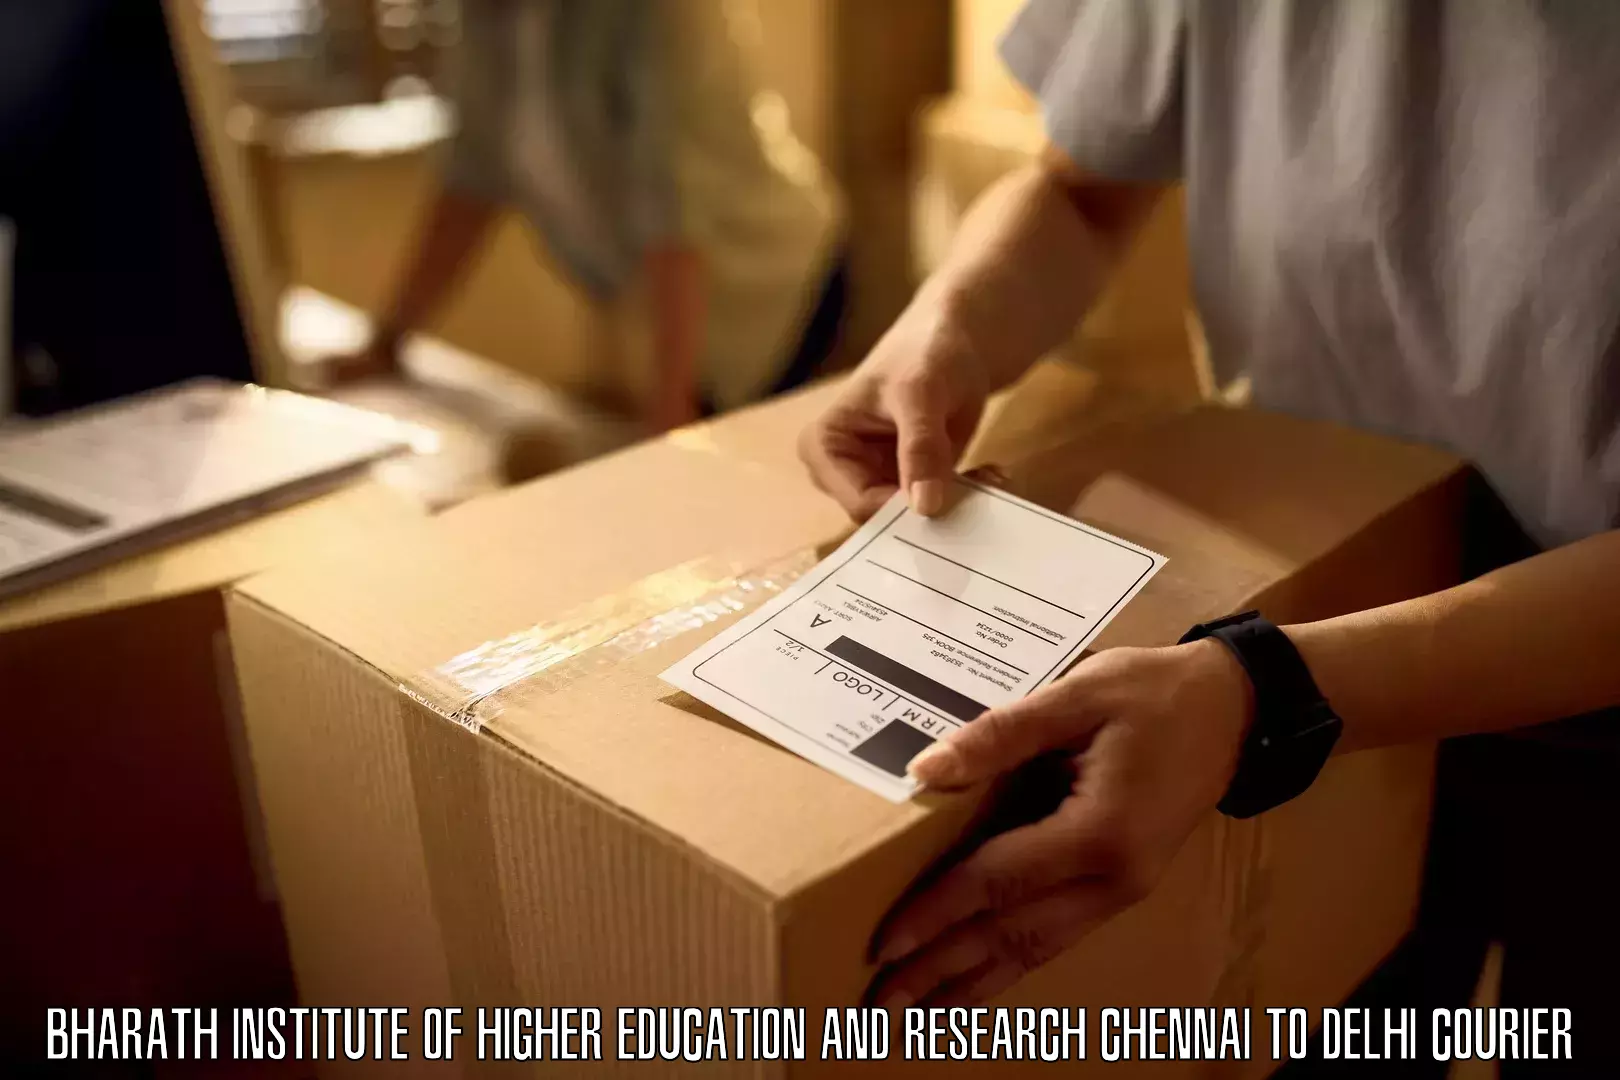 Specialized shipment handling Bharath Institute of Higher Education and Research Chennai to Jawaharlal Nehru University New Delhi